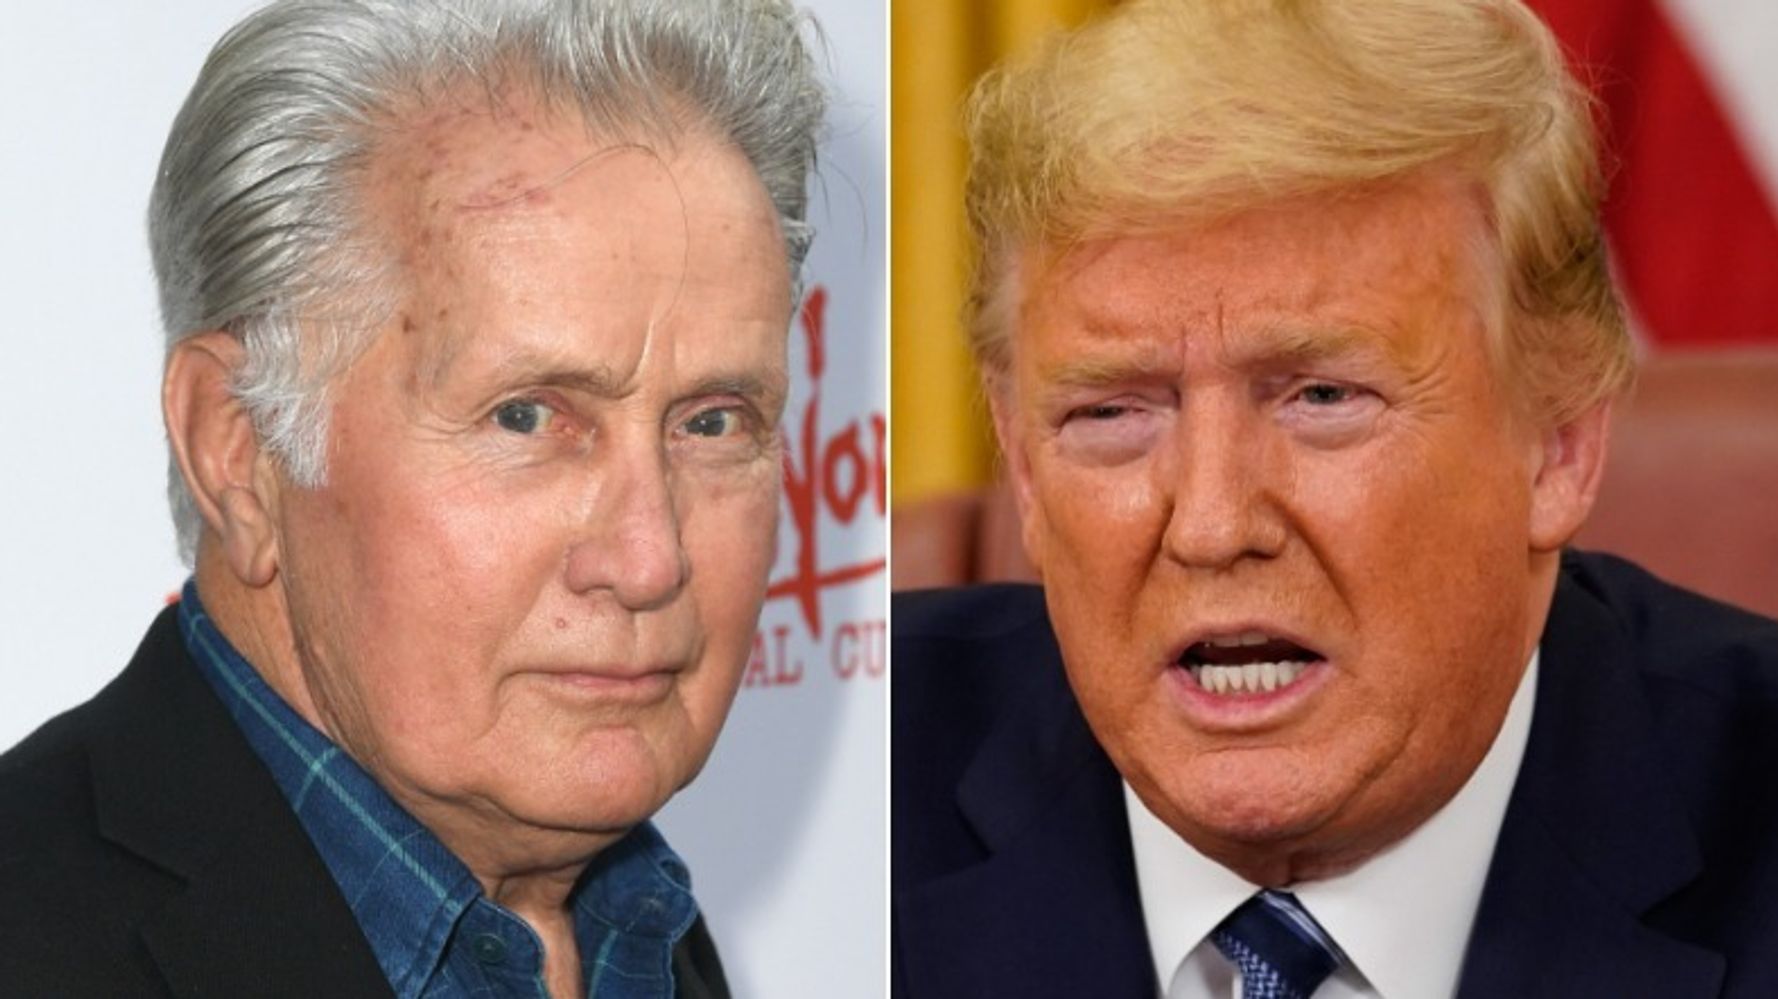 Martin Sheen Rips Trump With A Critique That Could Be Right Out Of ‘The West Wing’